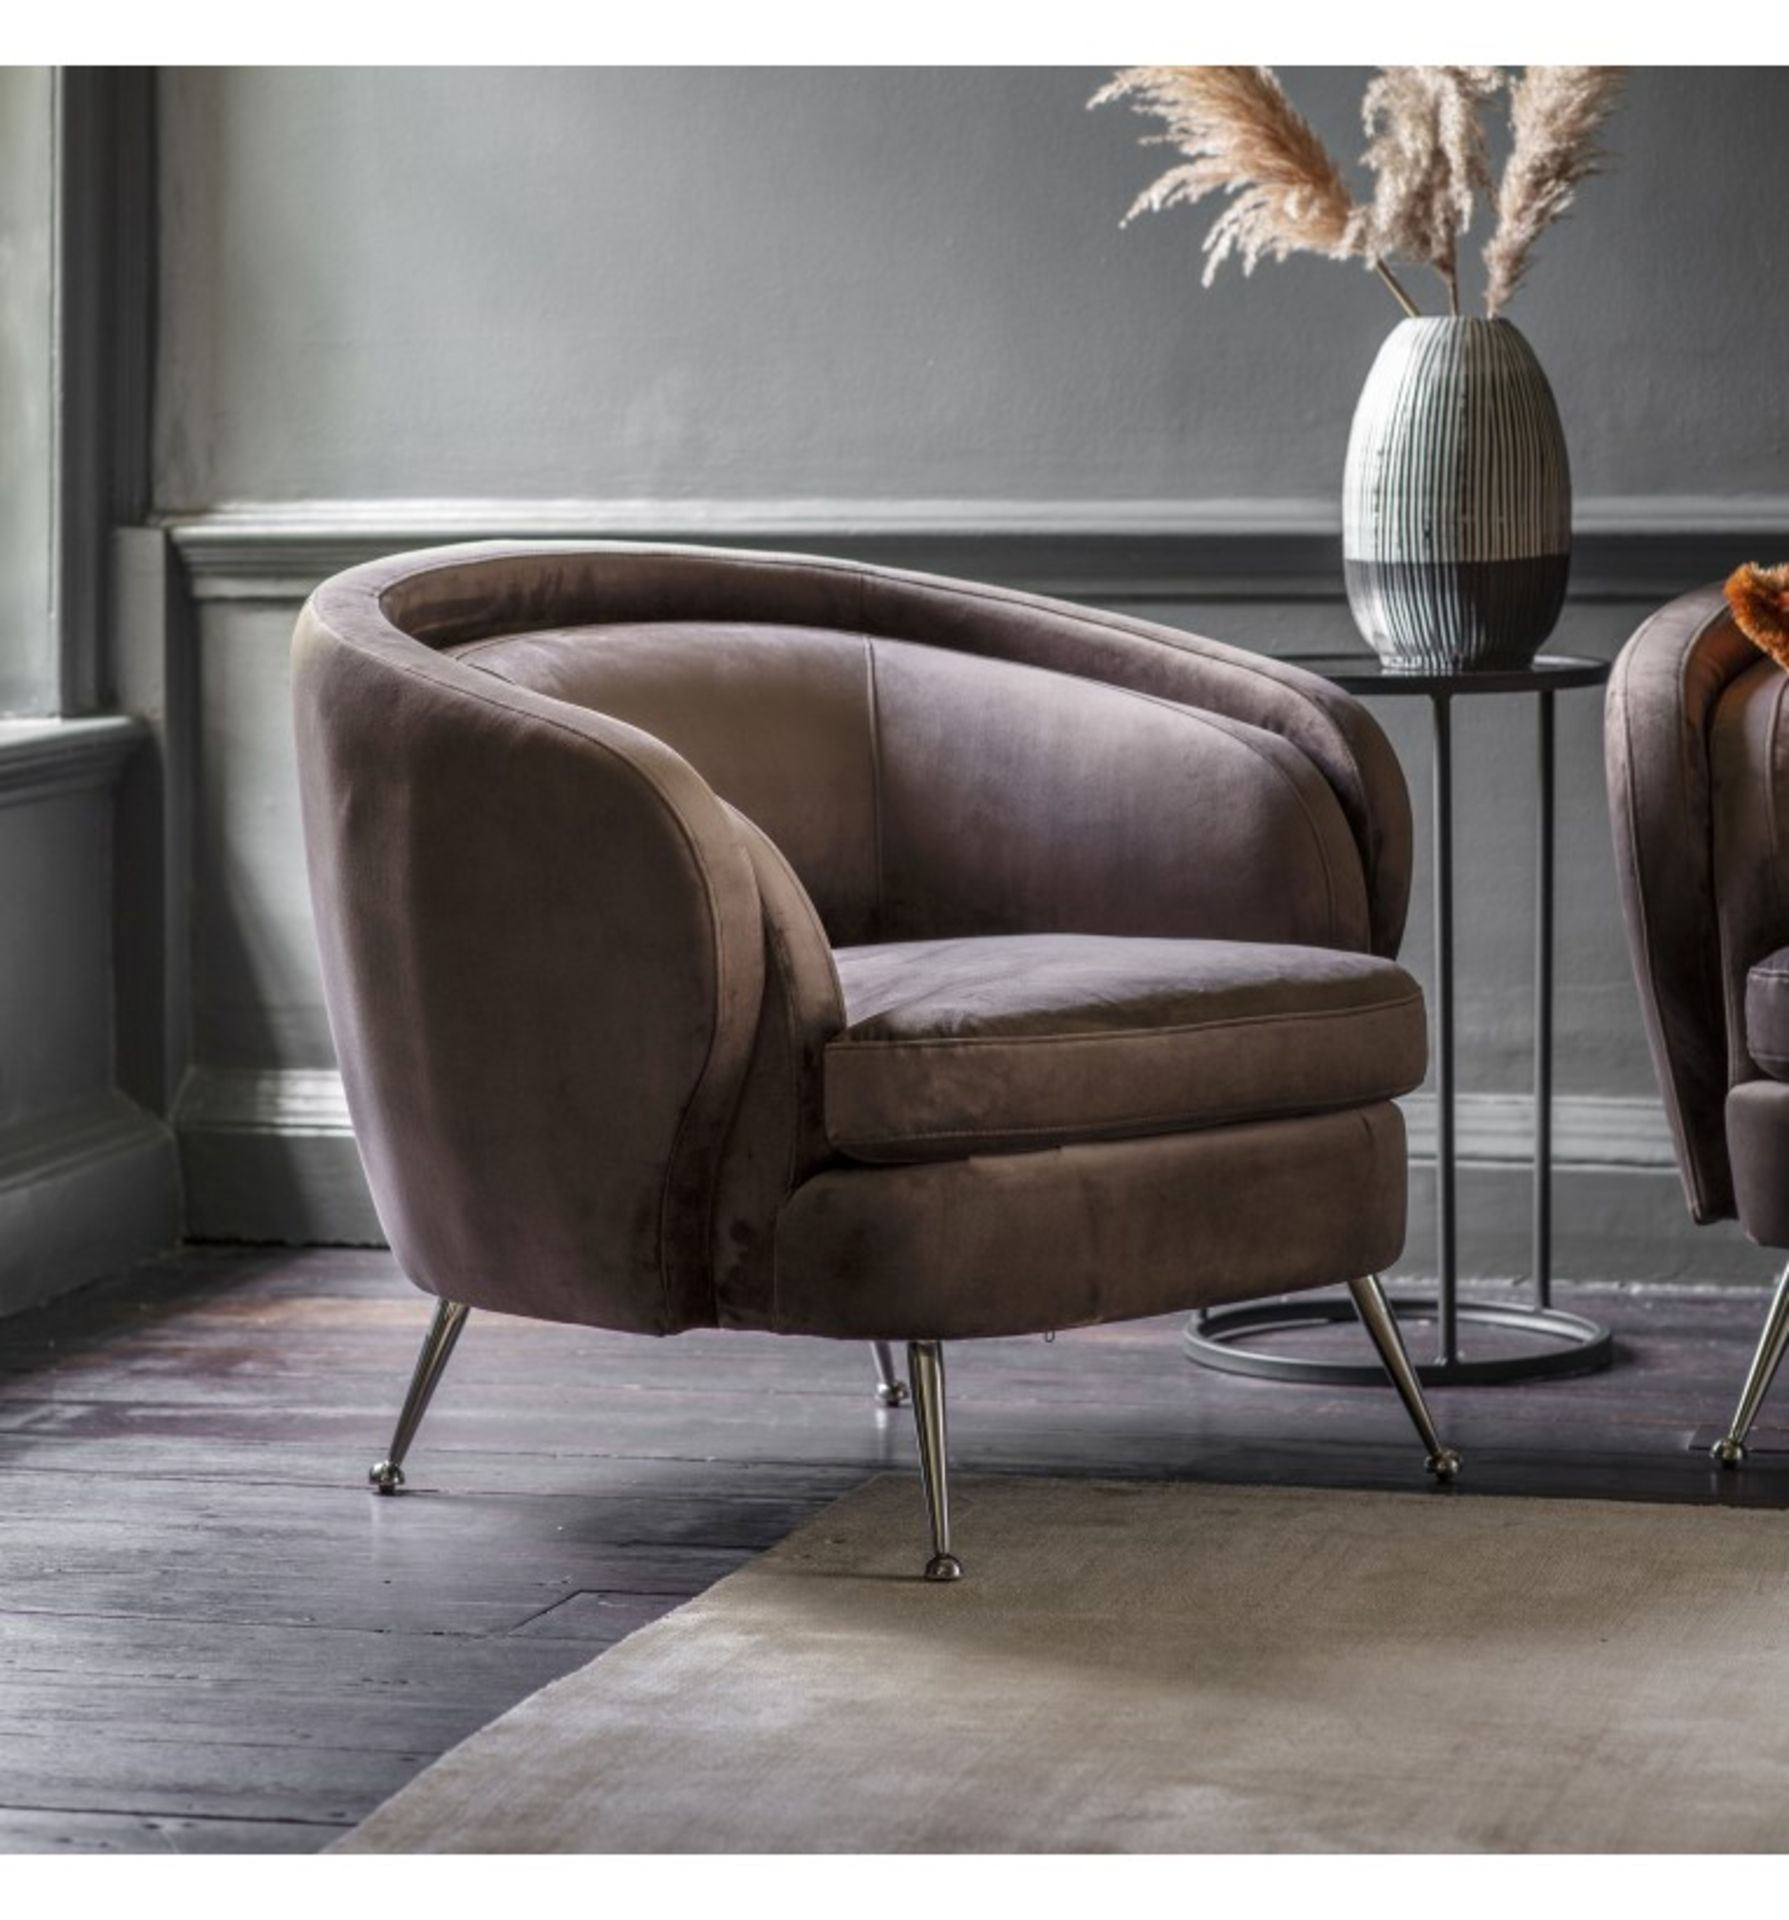 Tesoro Tub Chair Dark Taupe Velvet Contemporary tub chair with mid-century inspiration, perfect